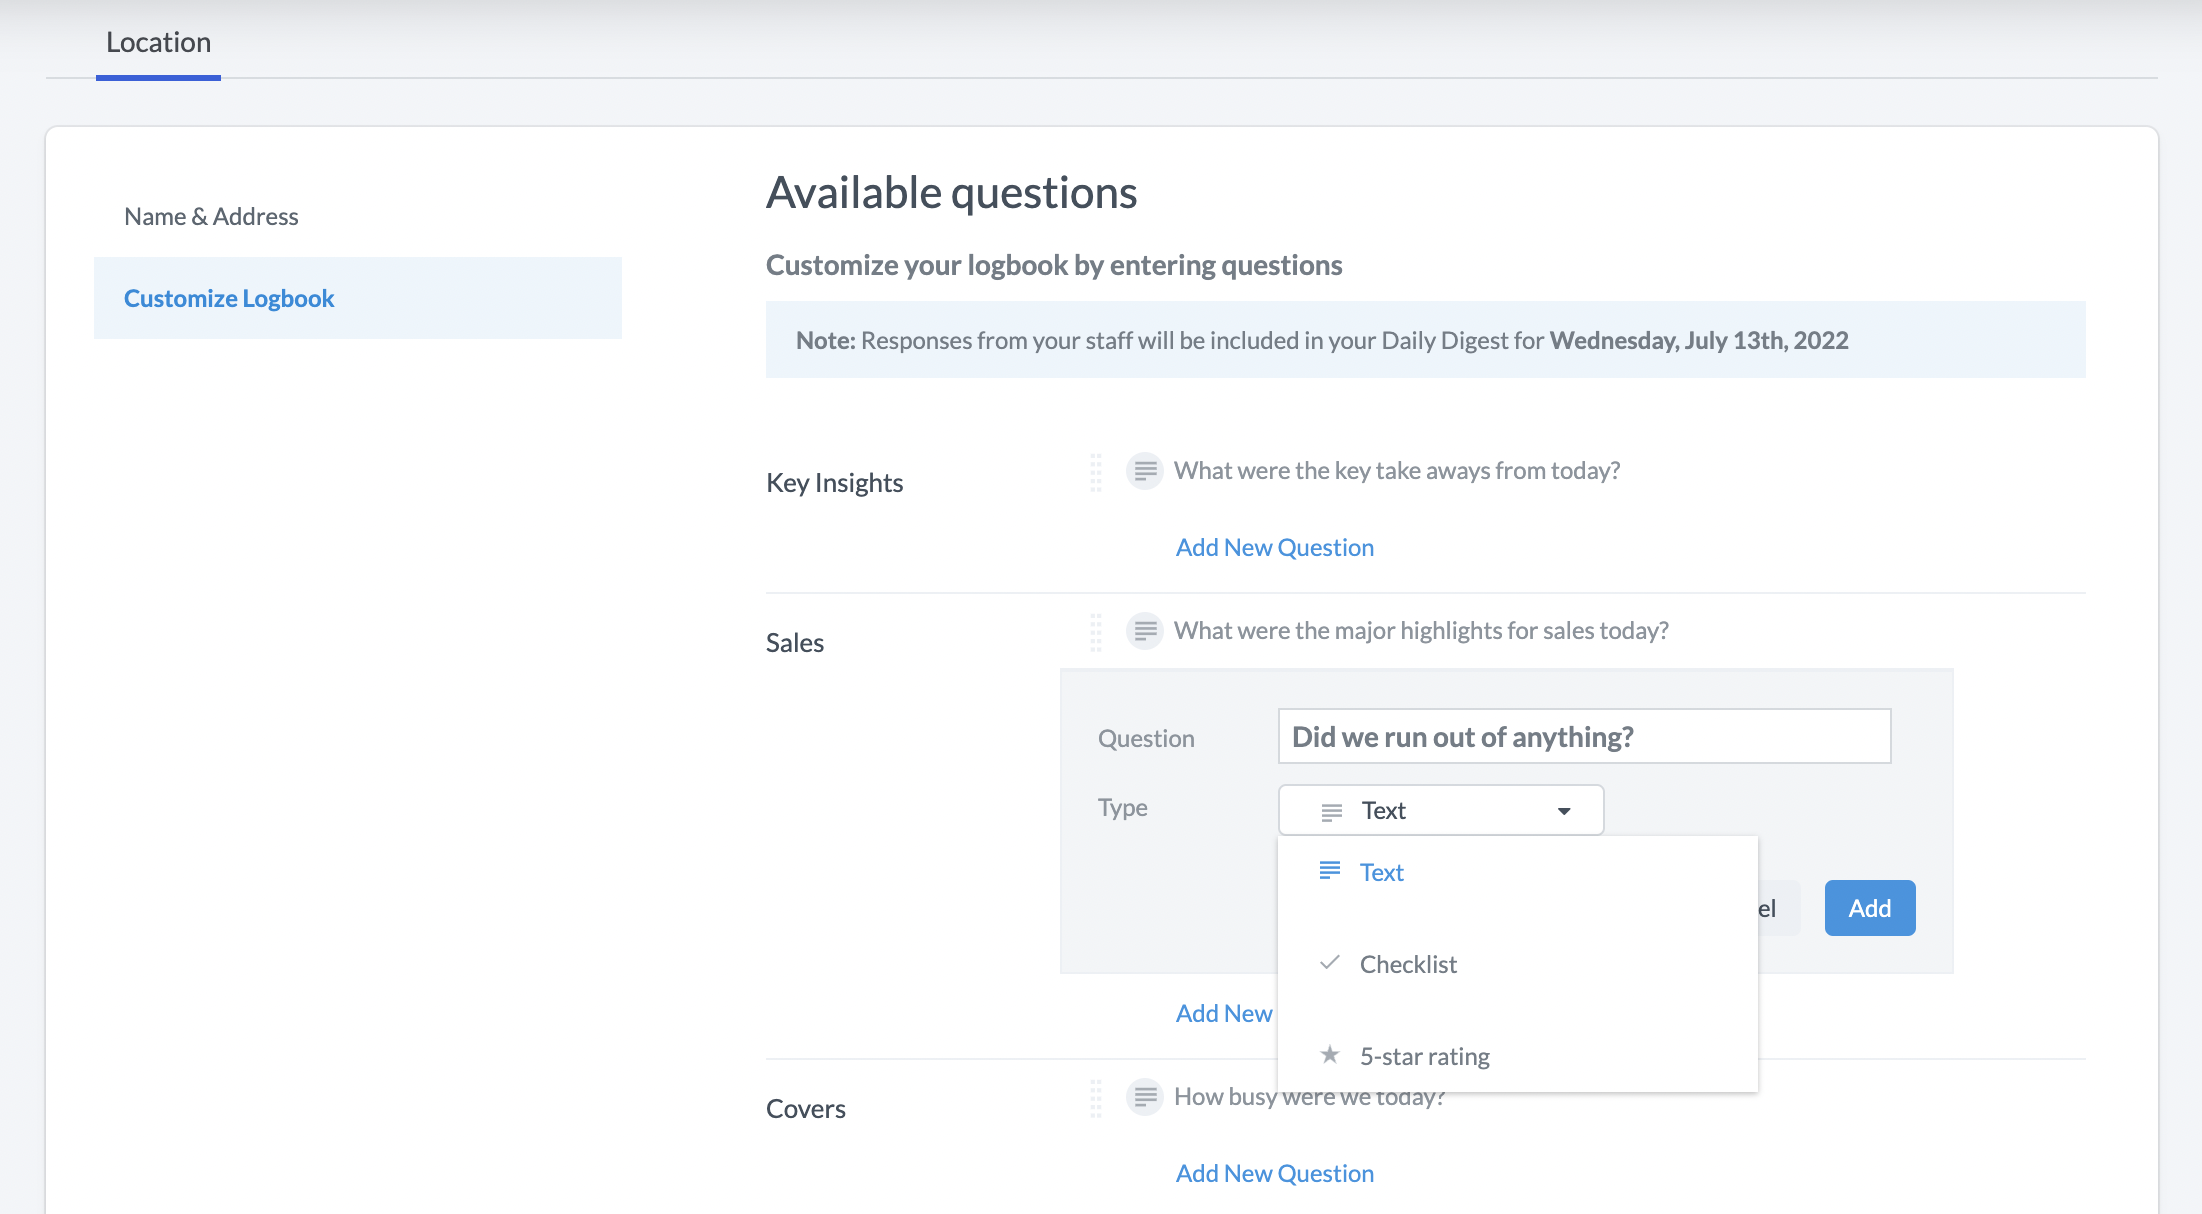 Customize-logbook-Questions.png